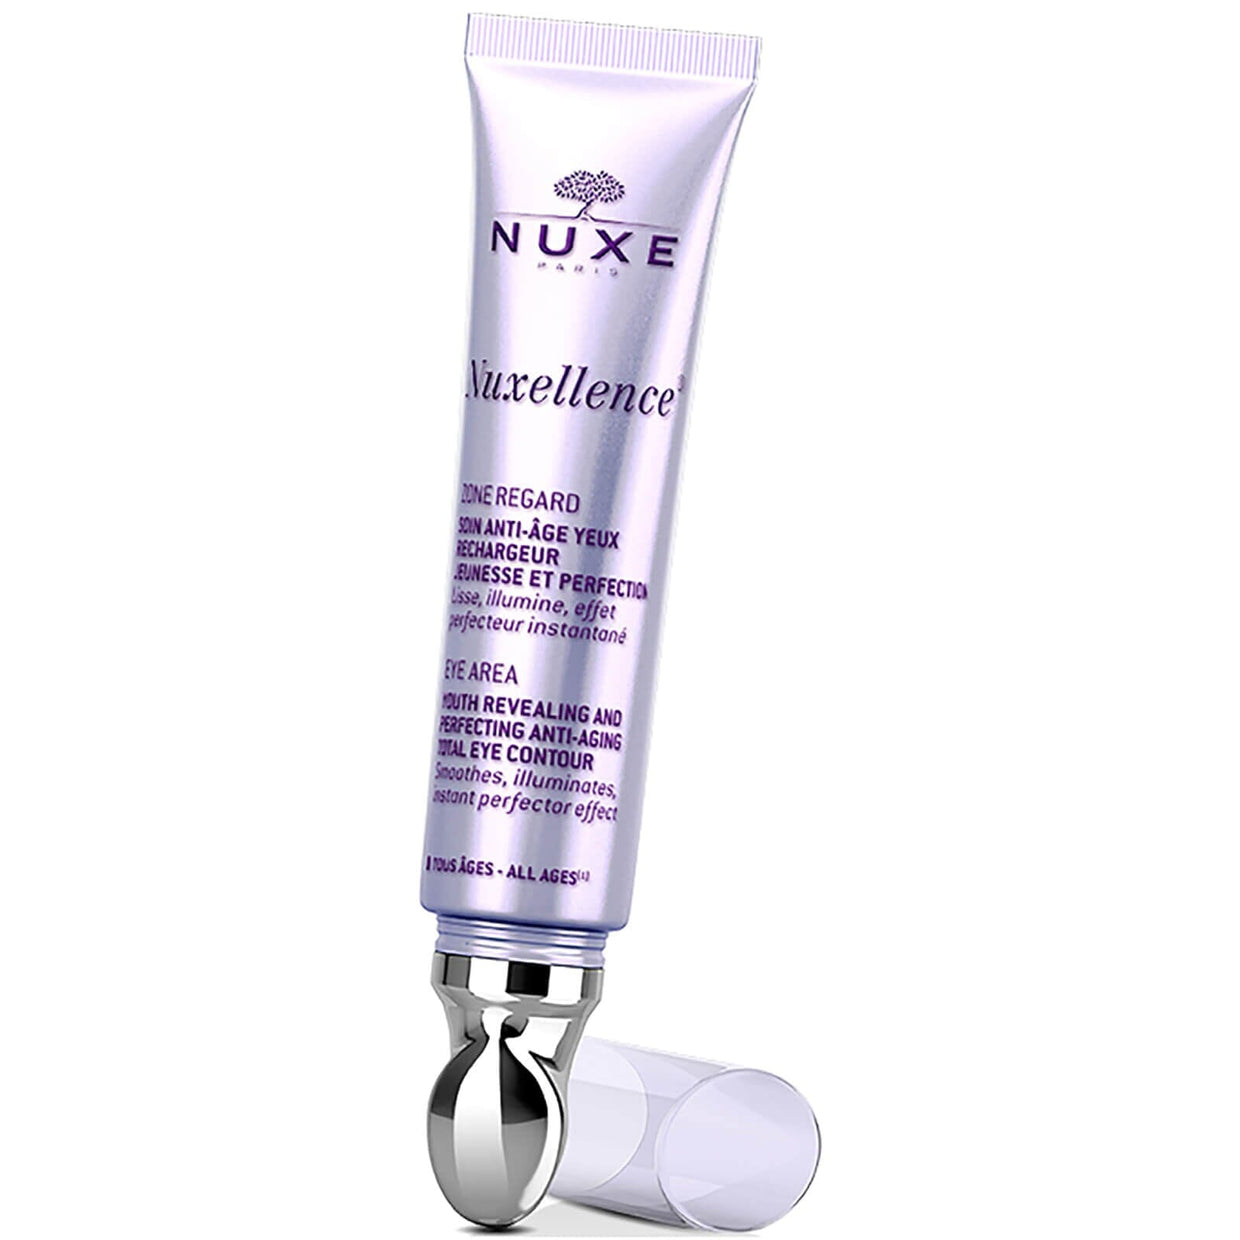 Nuxe Nuxellence Eye Area Nuxe 0.5 fl. oz (15 ml) Shop at Exclusive Beauty Club